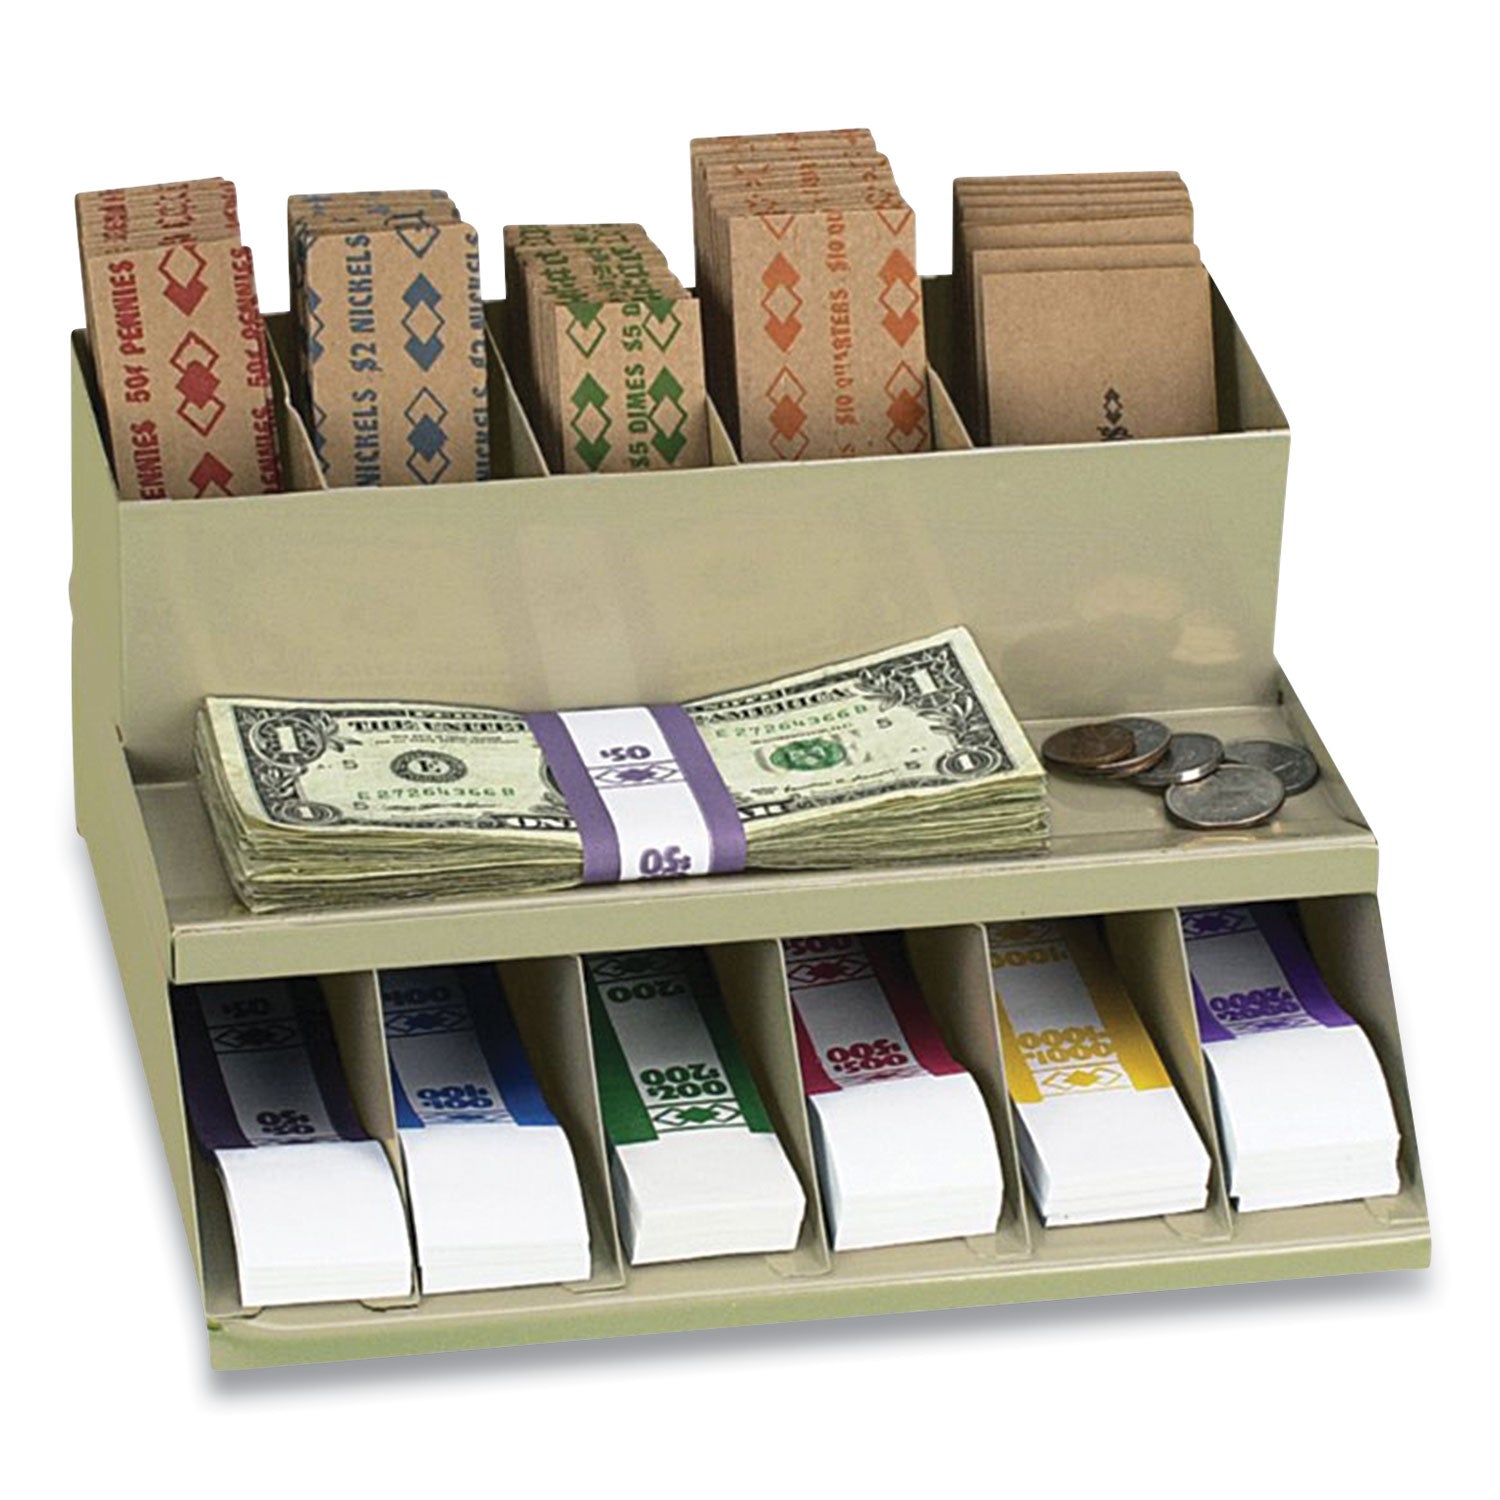 coin-wrapper-and-bill-strap-2-tier-rack-11-compartments-938-x-813-463-plastic-pebble-beige_cnk500013 - 2